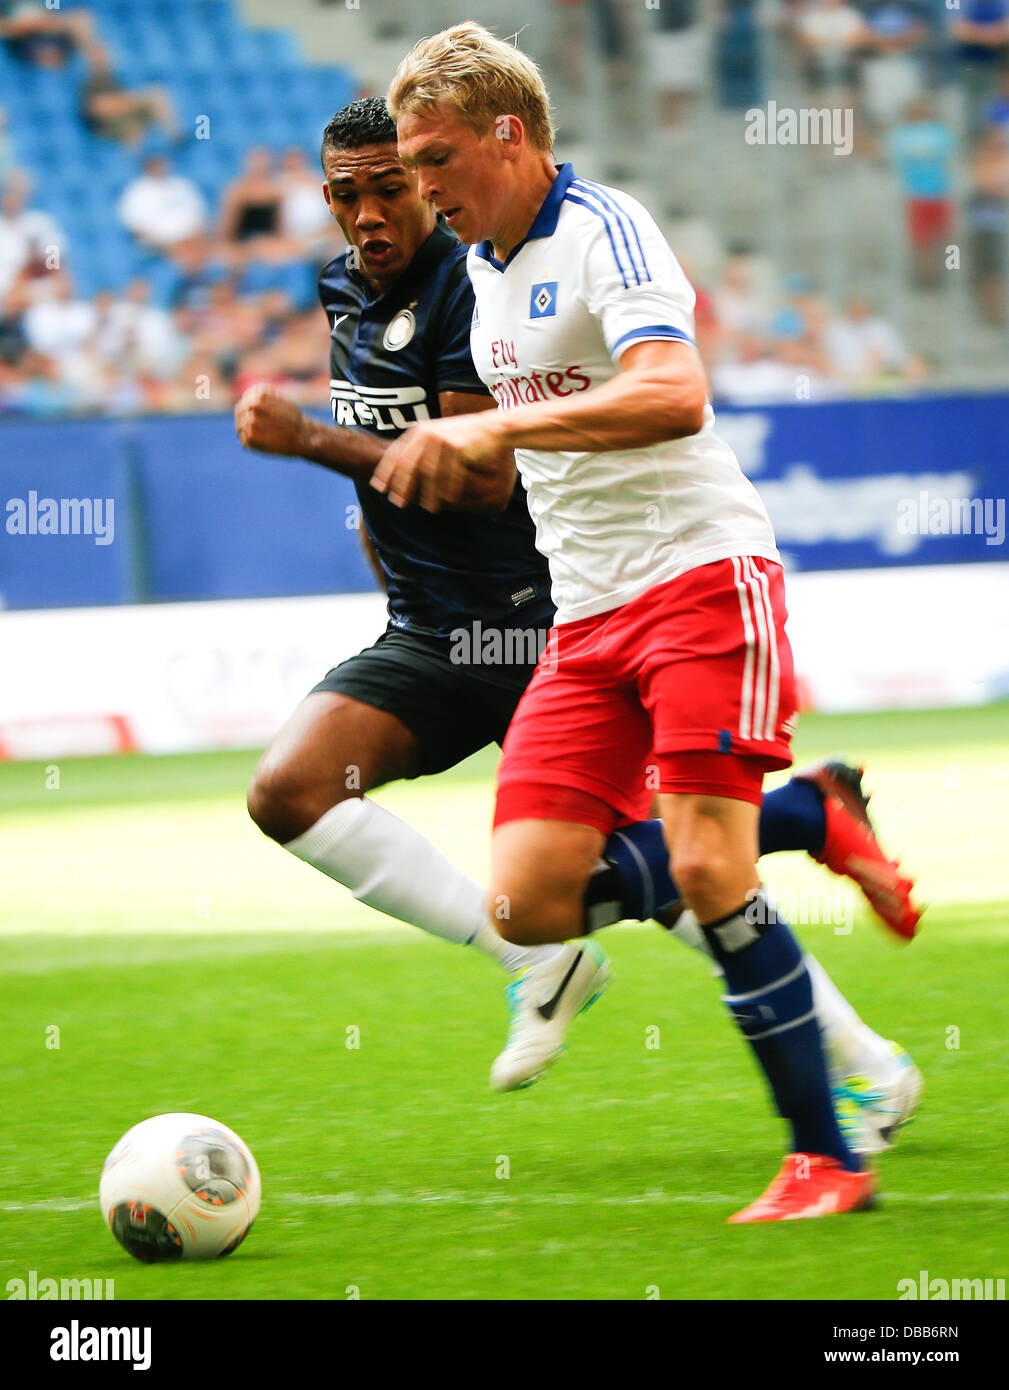 Milan's Juan Jesus (L) vies for the ball with Hamburg's Artjoms Rudnevs during the test match between Hamburger SV and Inter Milan at Imtech Arena in Hamburg, Germany, 27 July 2013. Photo: AXEL HEIMKEN Stock Photo